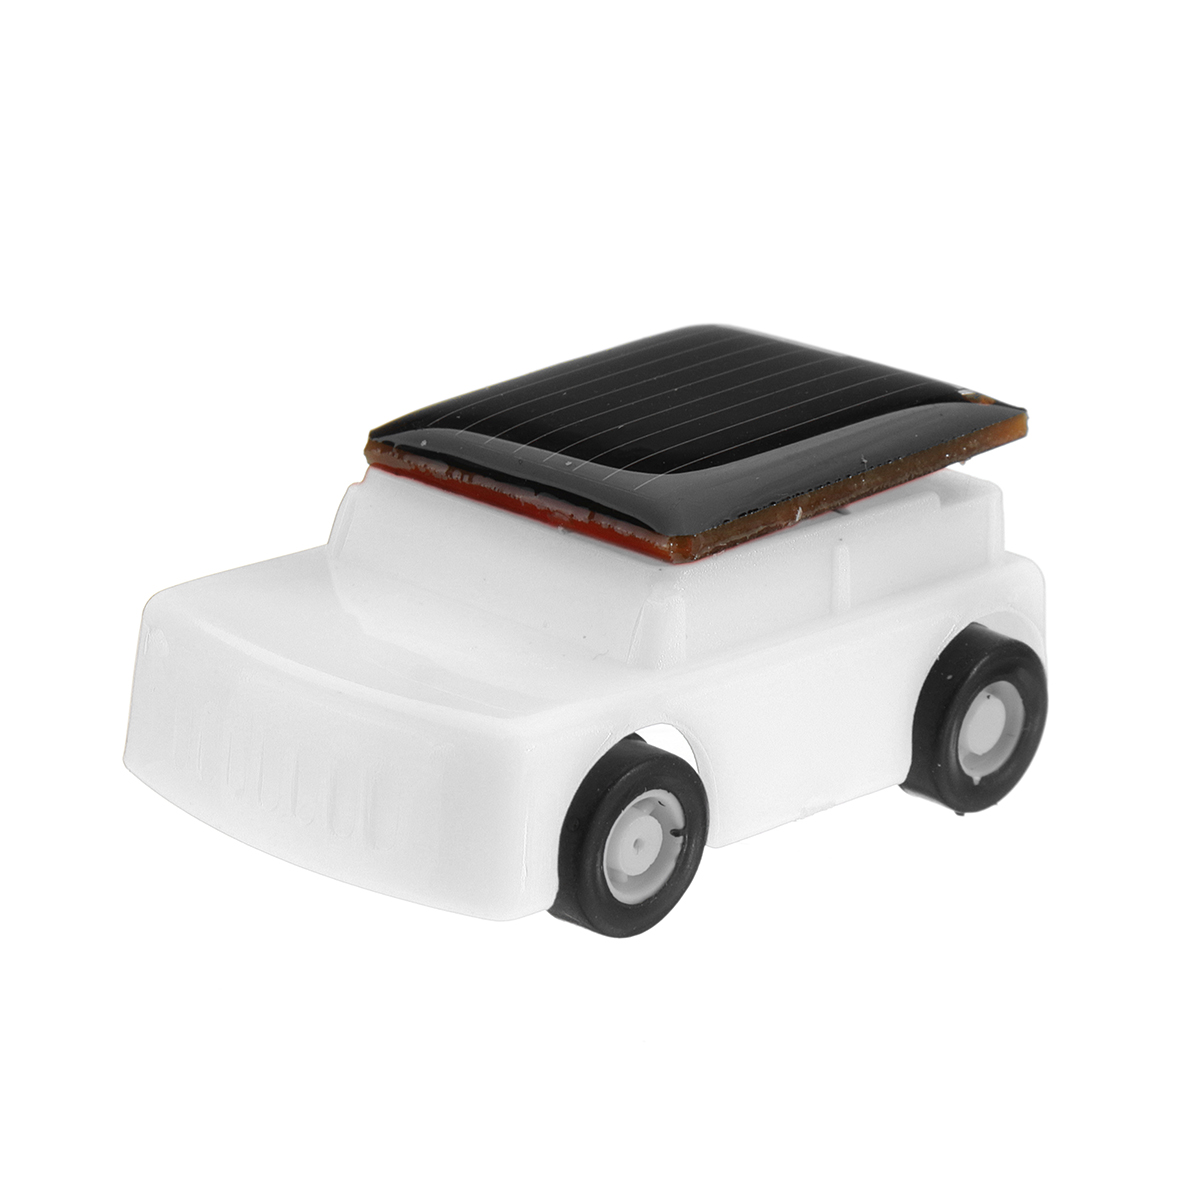 Solar-Powered-Toy-Mini-Car-Kids-Gift-Super-Cute-Creative-ABS-No-toxic-Material-Children-Favorate-1315990-7